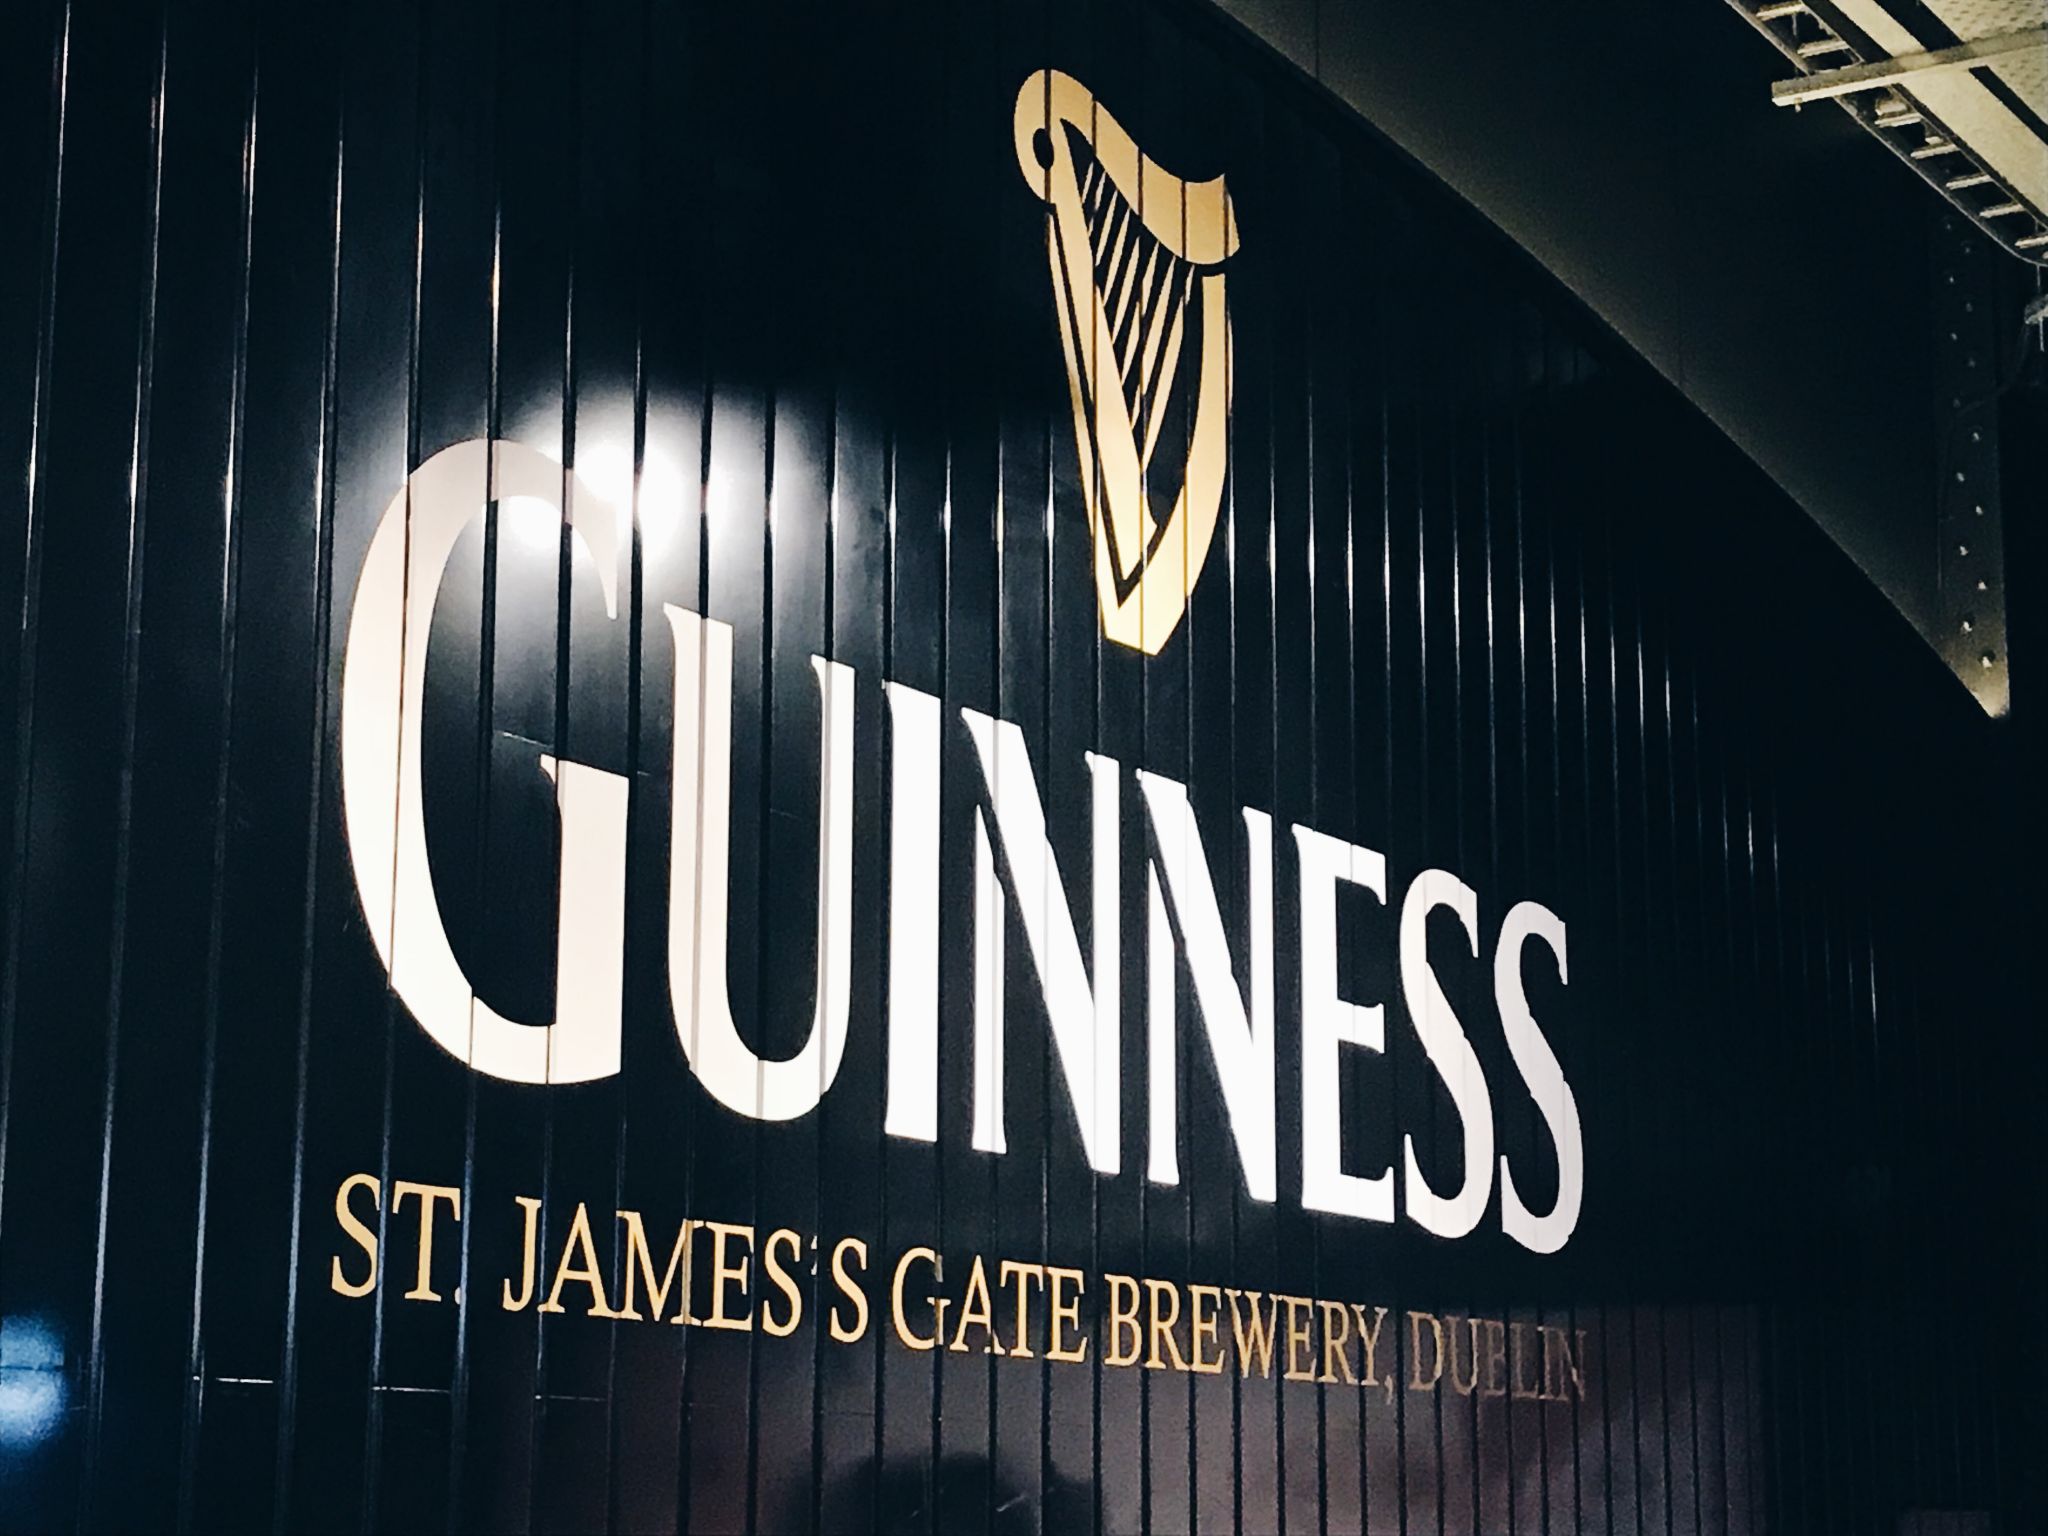 Must see places in Ireland - Guinness Storehouse